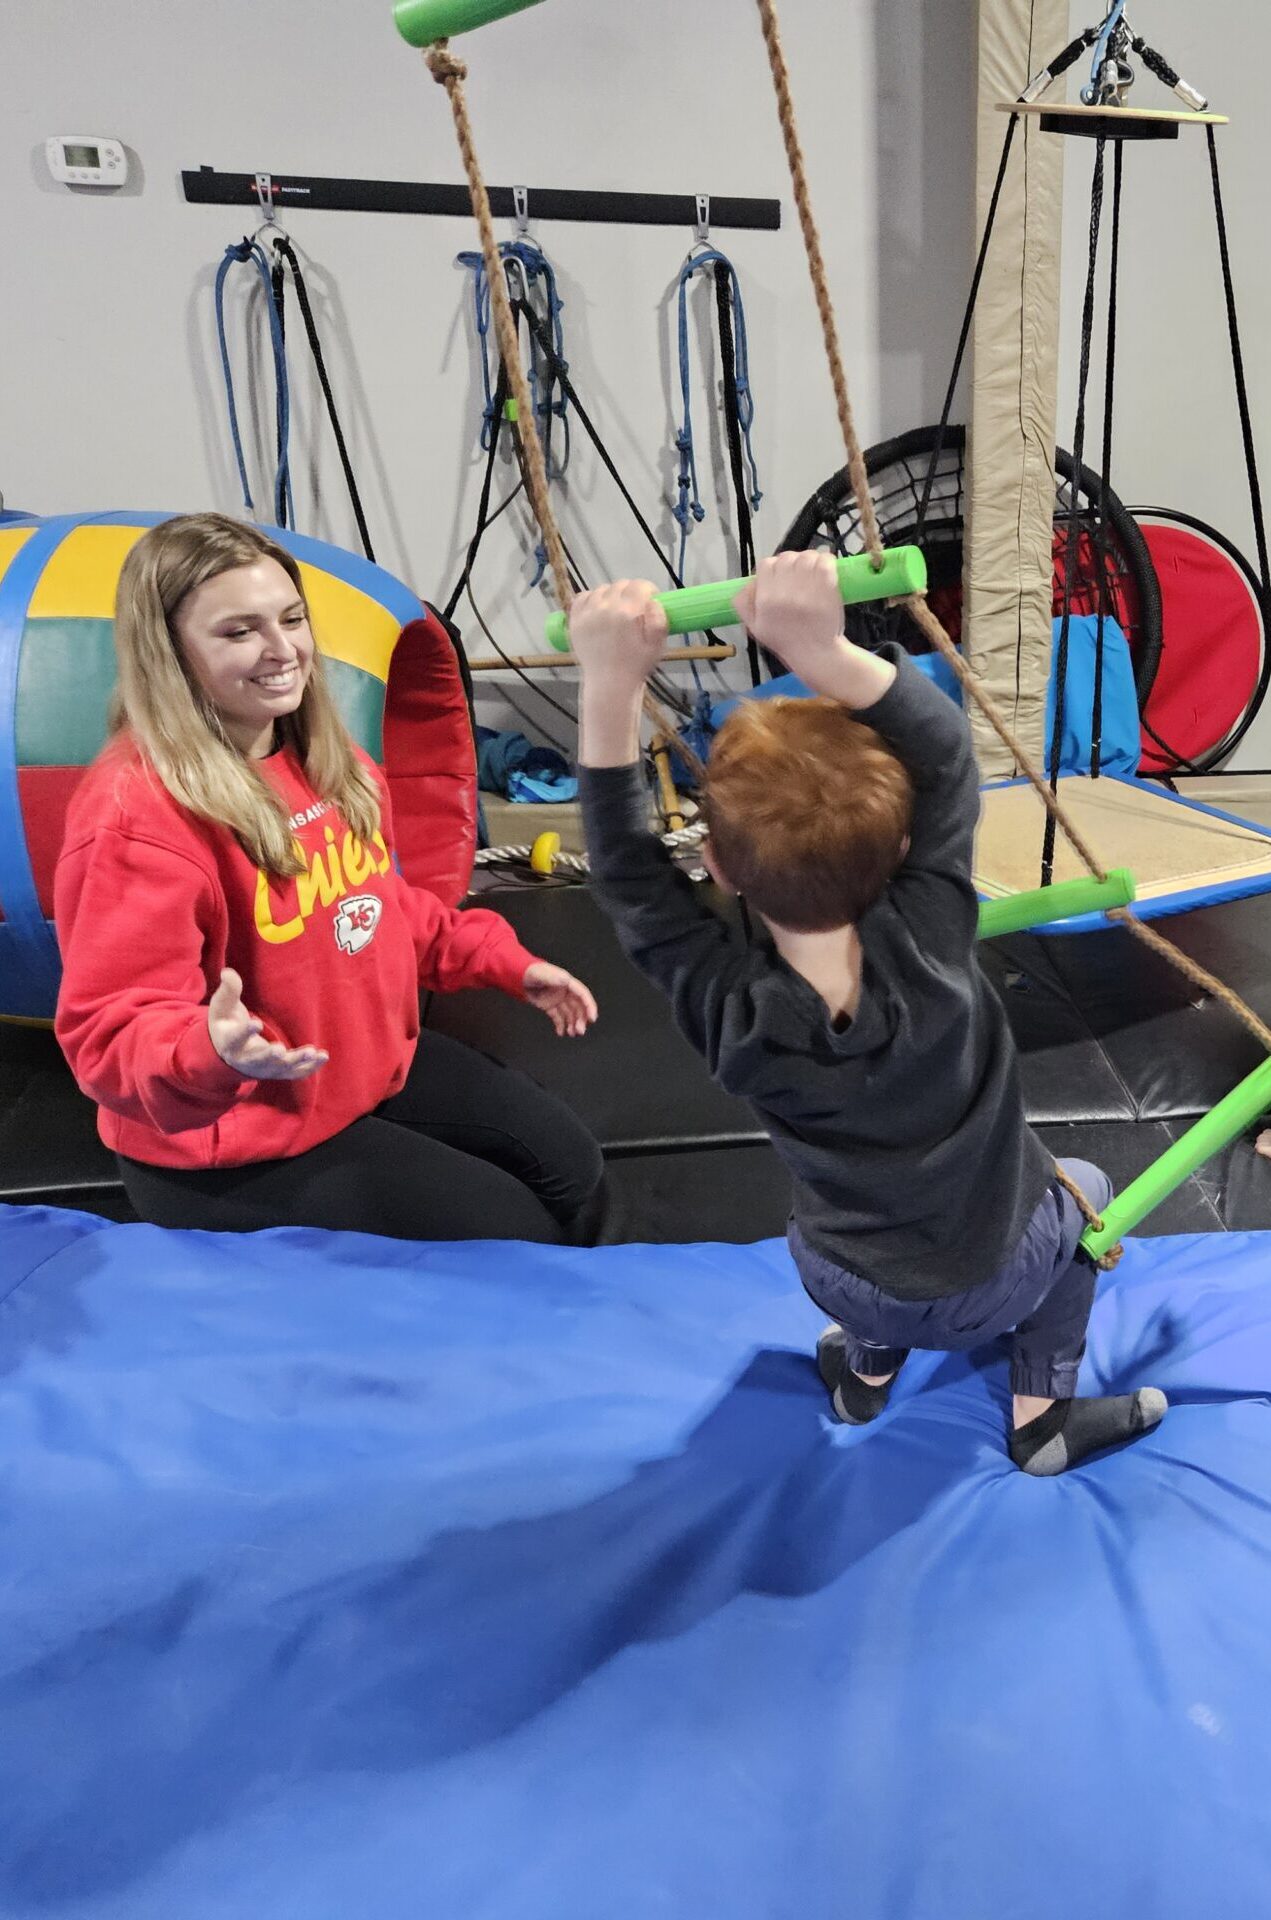 Occupational therapist assists a friend at Step Forward Therapy during a session, as the friend points to her ear, highlighting the focus on body awareness and communication skills development.